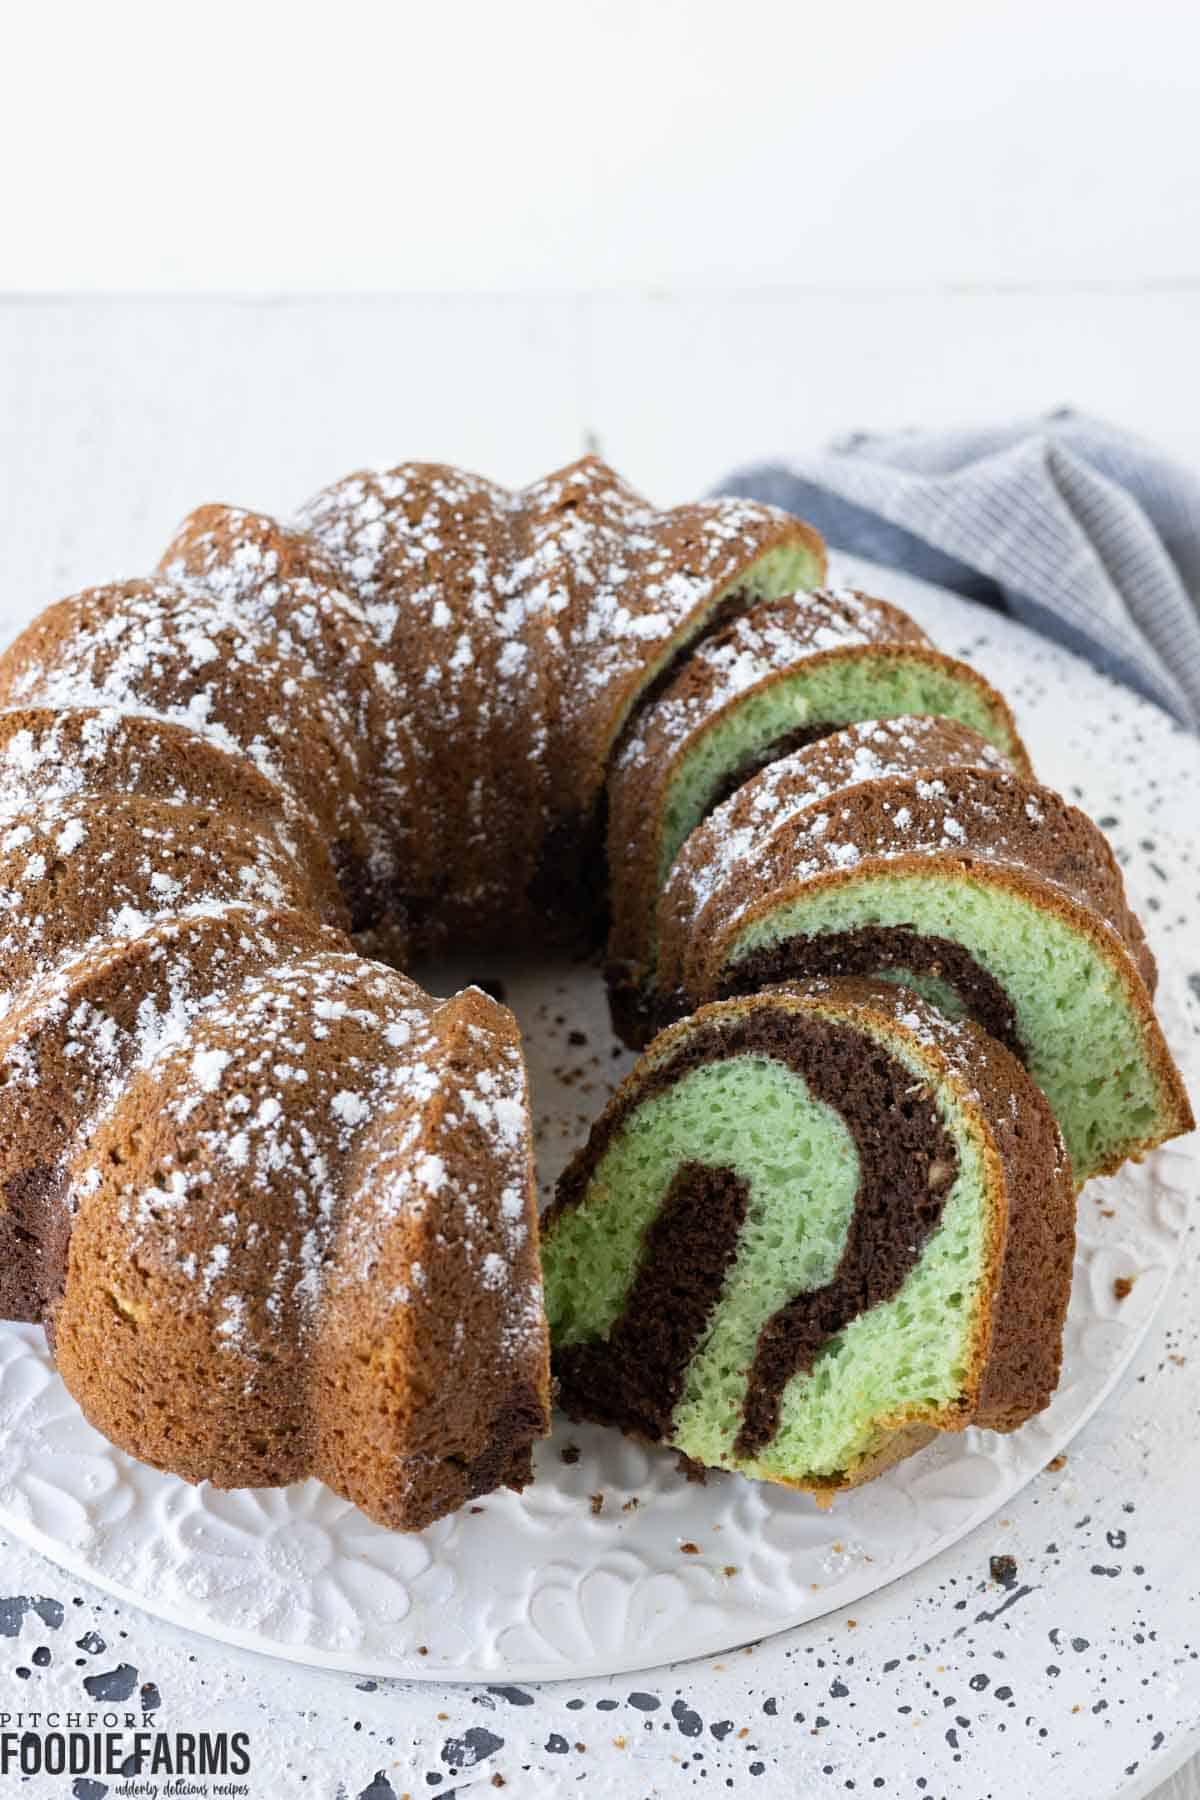 A chocolate pistachio marbled bundt cake with a few slices of cake on a plate.